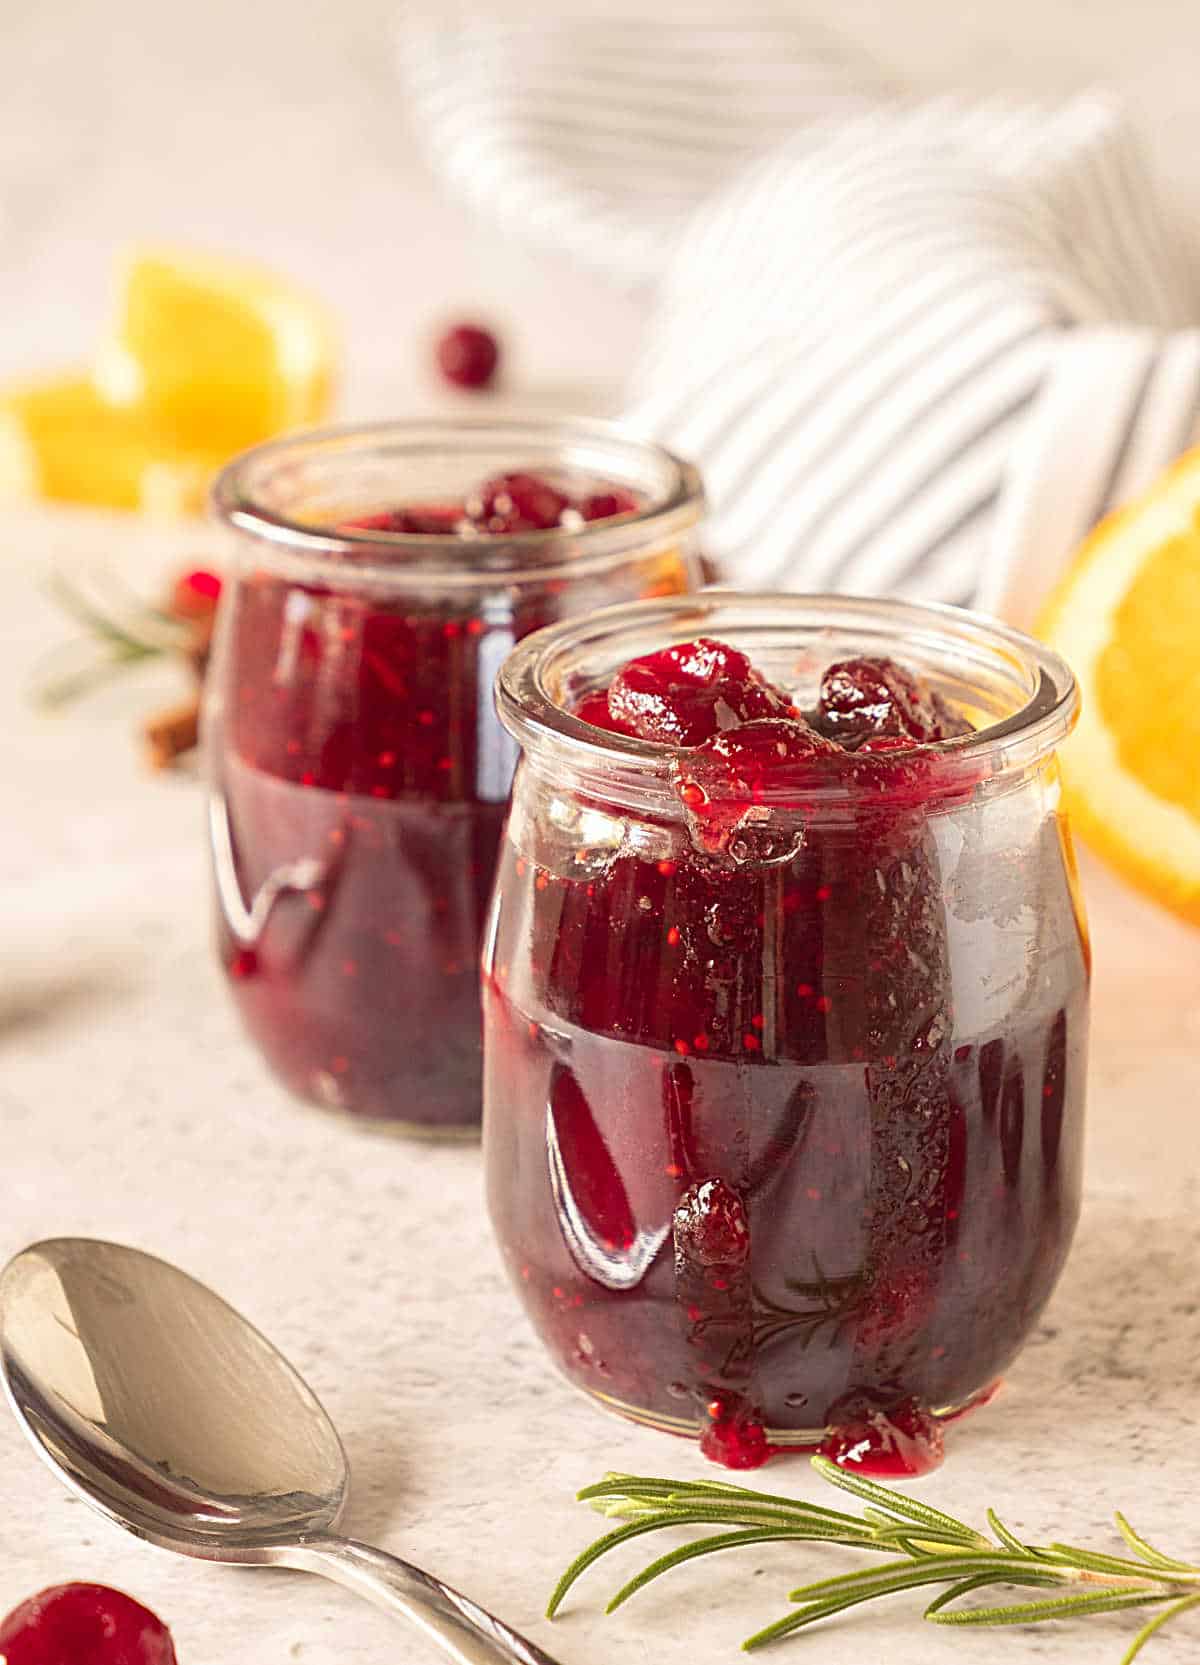 Two glass jars with cranberry sauce on a beige background with a striped cloth. Orange slices, a spoon. 